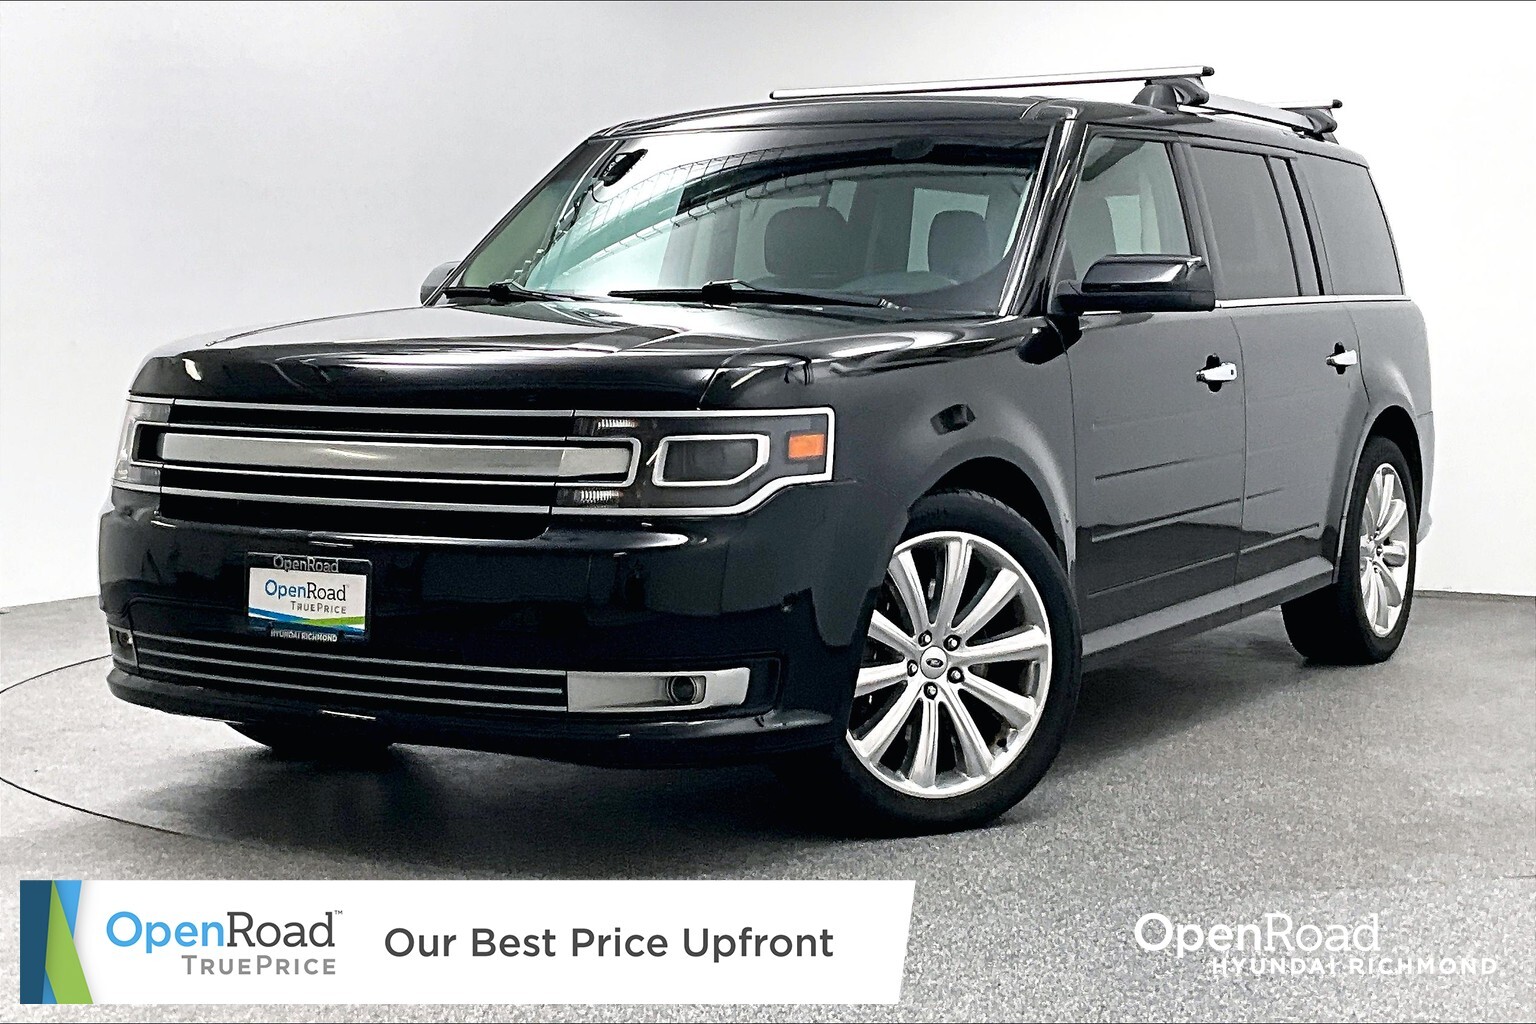 2017 Ford Flex Limited - AWD Low Mileage | Great Value